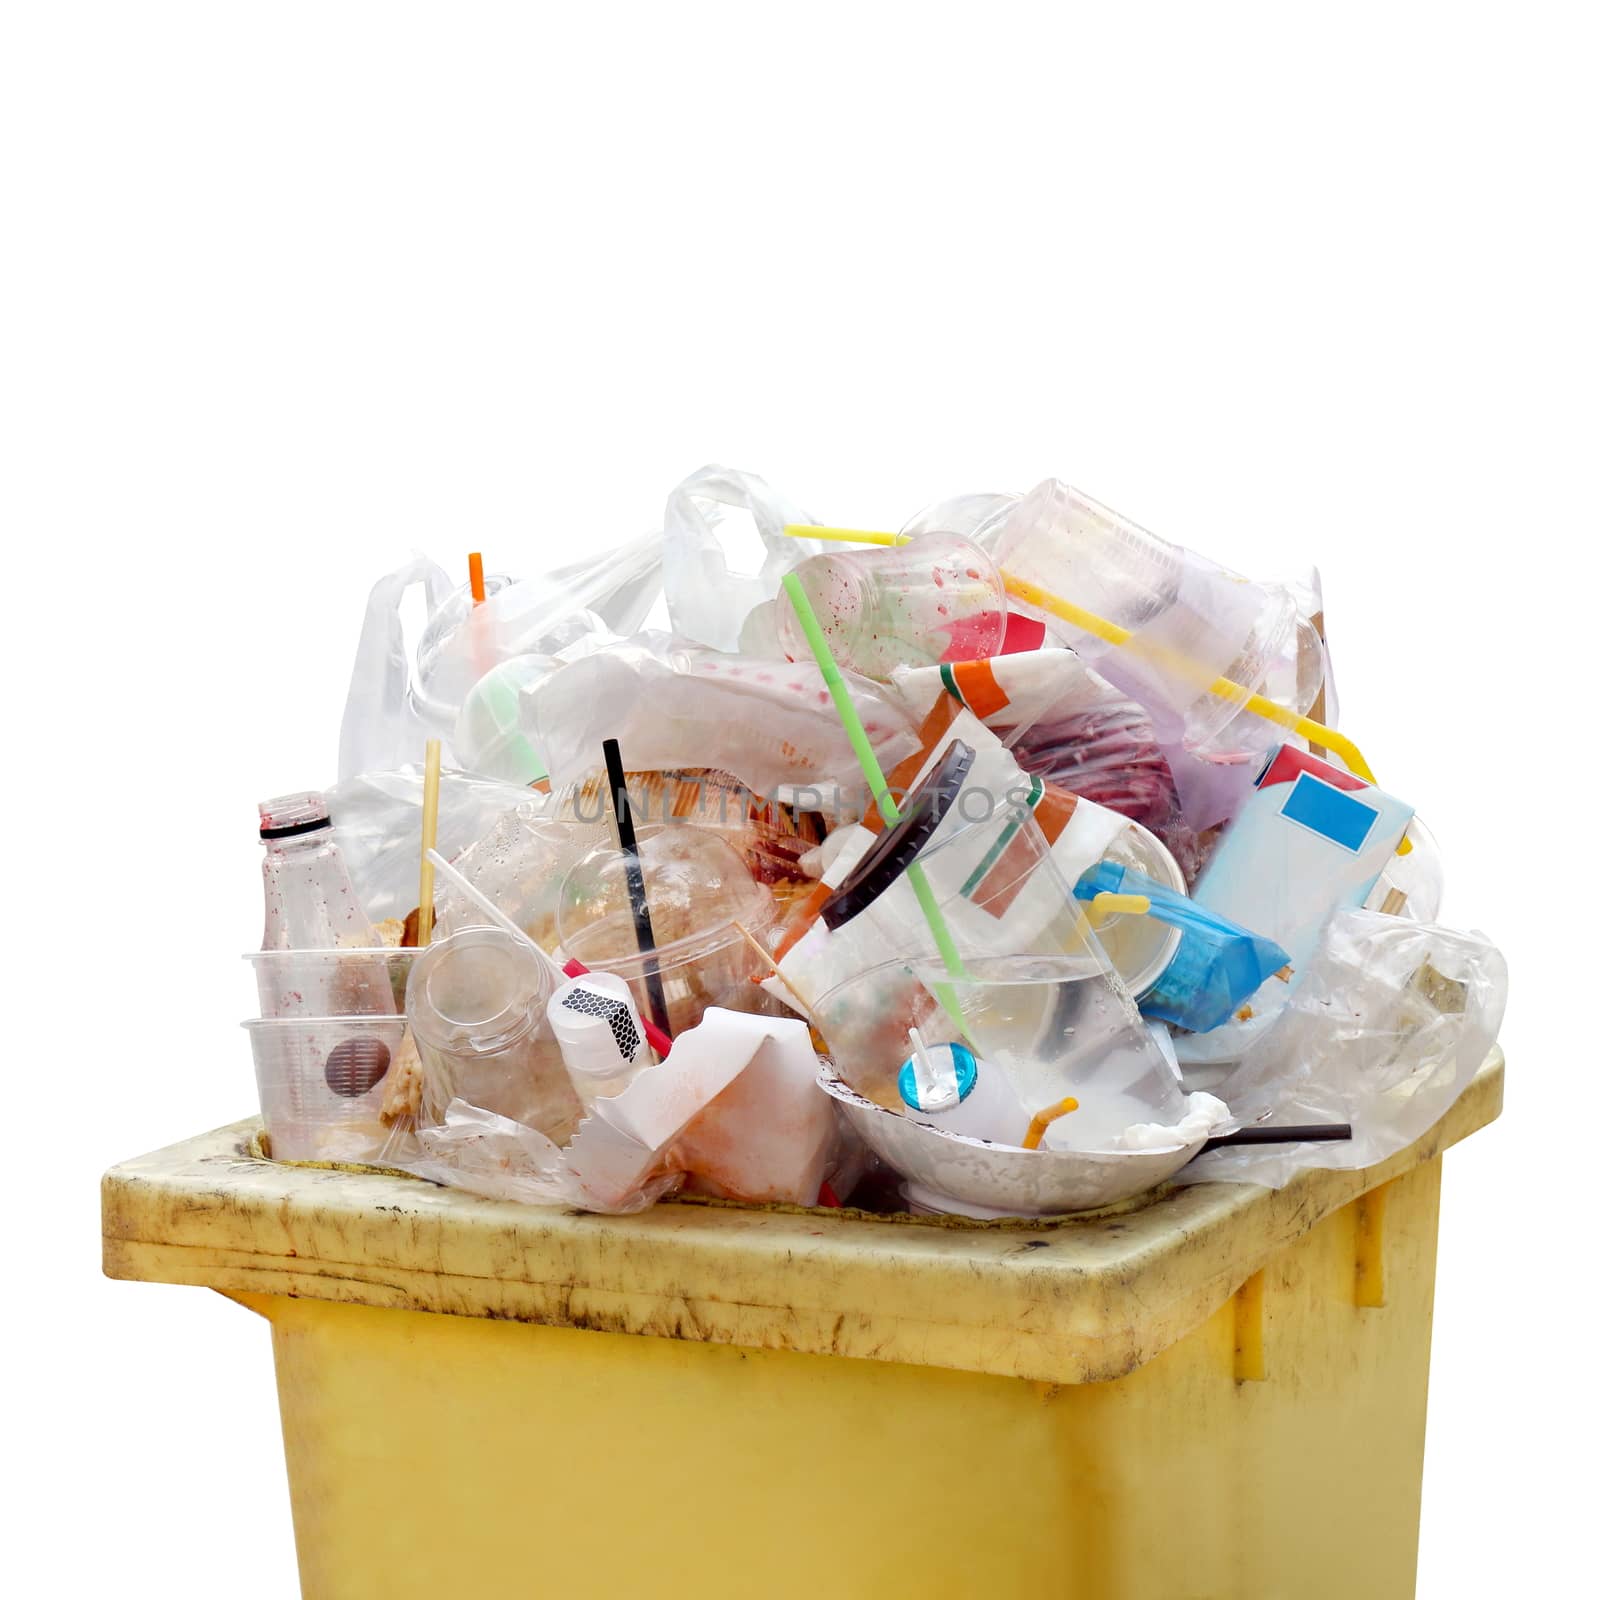 Waste heap, Waste Garbage trash plastic full of trash bin yellow, Plastic bag waste Lots of junk isolated on white background, Garbage many close-up by cgdeaw